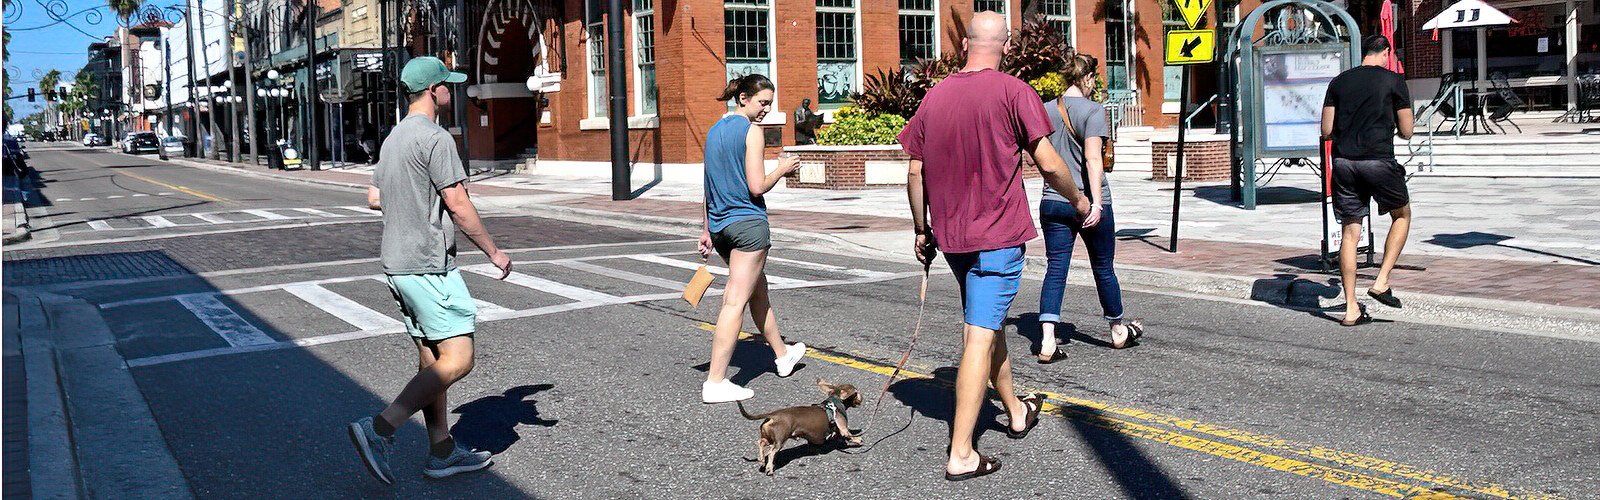 With few motor vehicles in the streets, foot traffic on Seventh Avenue in Ybor City was more relaxed on World Car-Free Day.